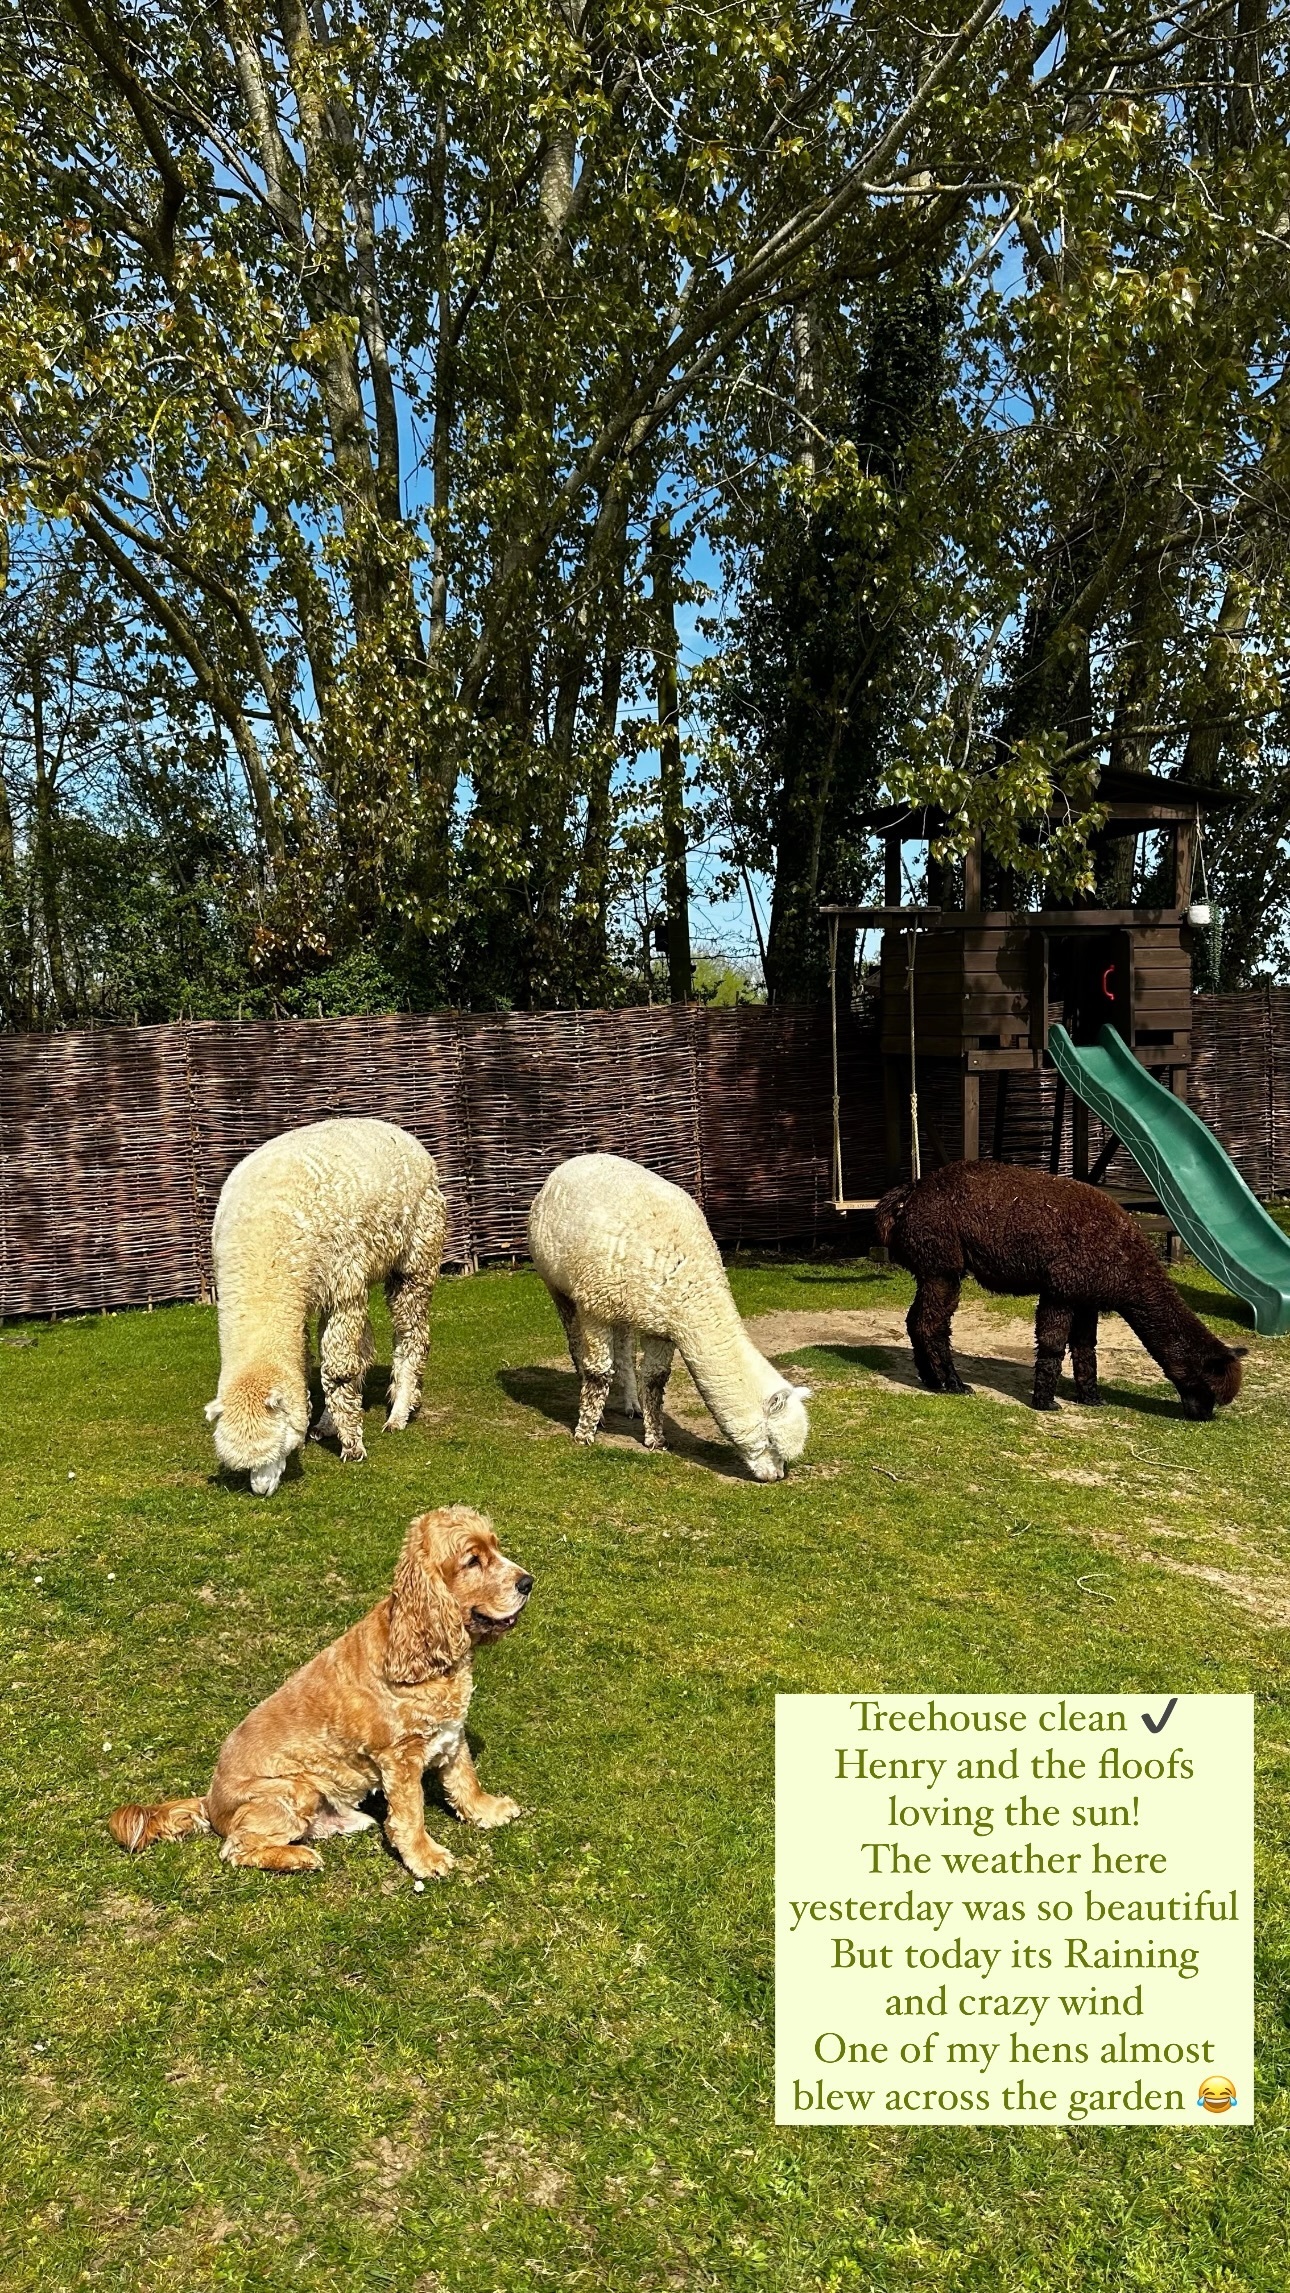 Once cleaned, Sophie shared an adorable picture of her dog Henry alongside her three alpacas